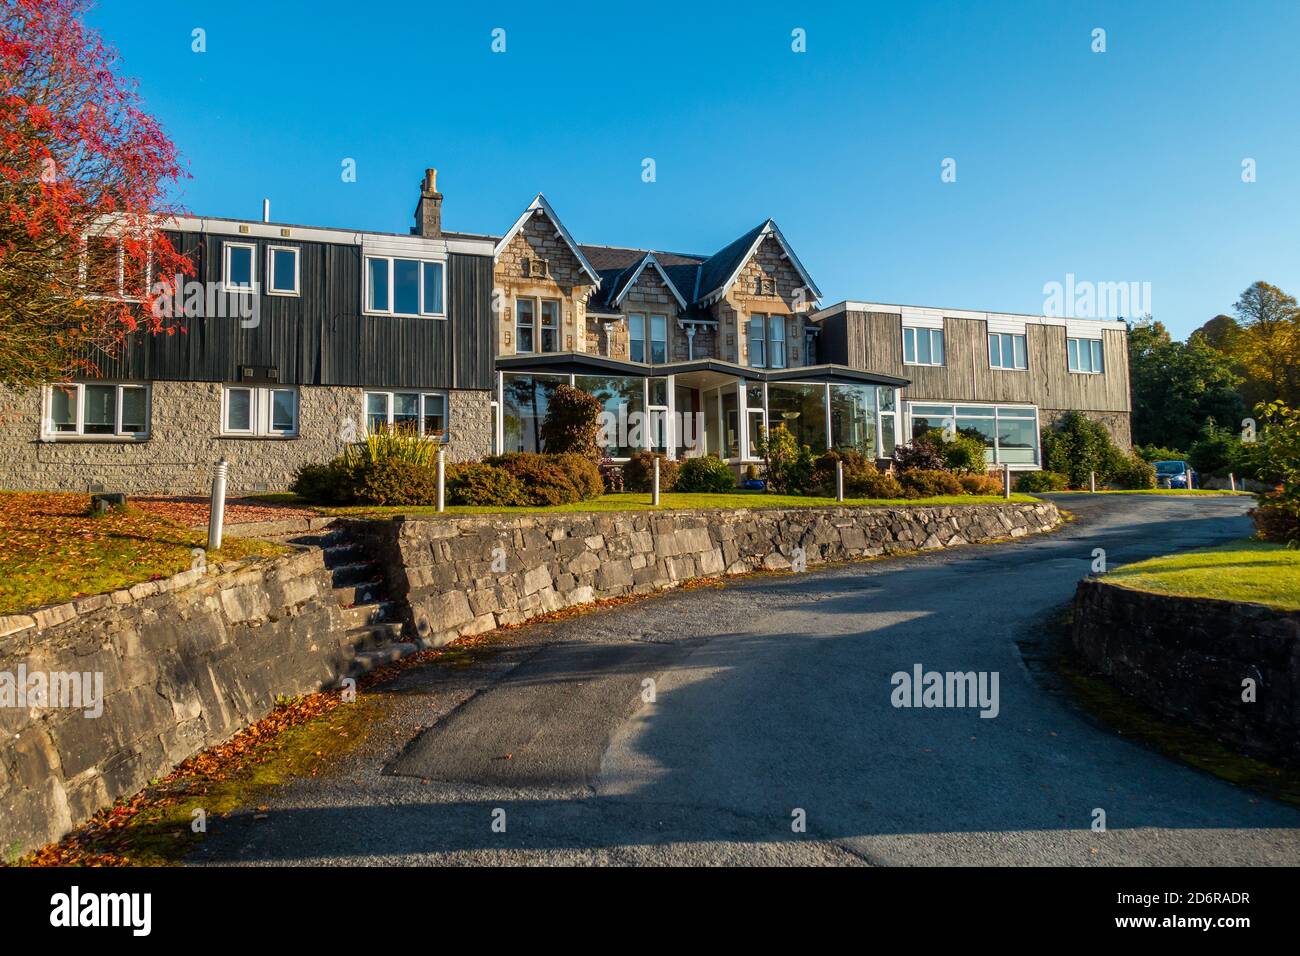 The Acarsaid Hotel in the town of Pitlochry, Perthshire, Scotland, UK Stock Photo